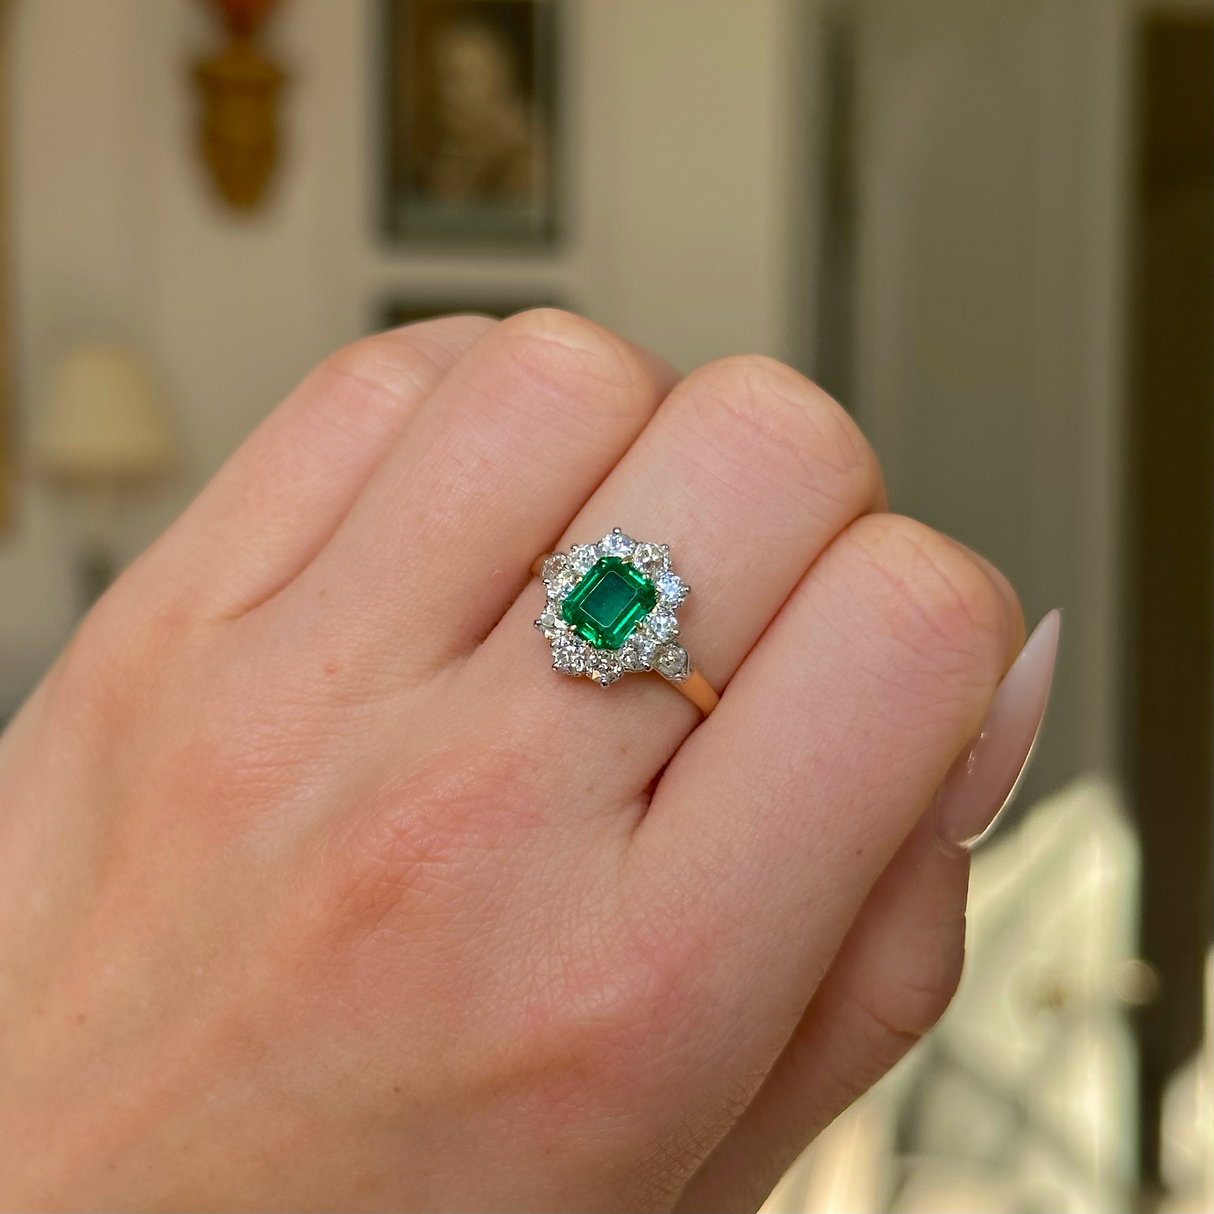 Antique, Edwardian Emerald and Diamond Engagement Ring, 18ct Yellow Gold and Platinum worn on closed hand